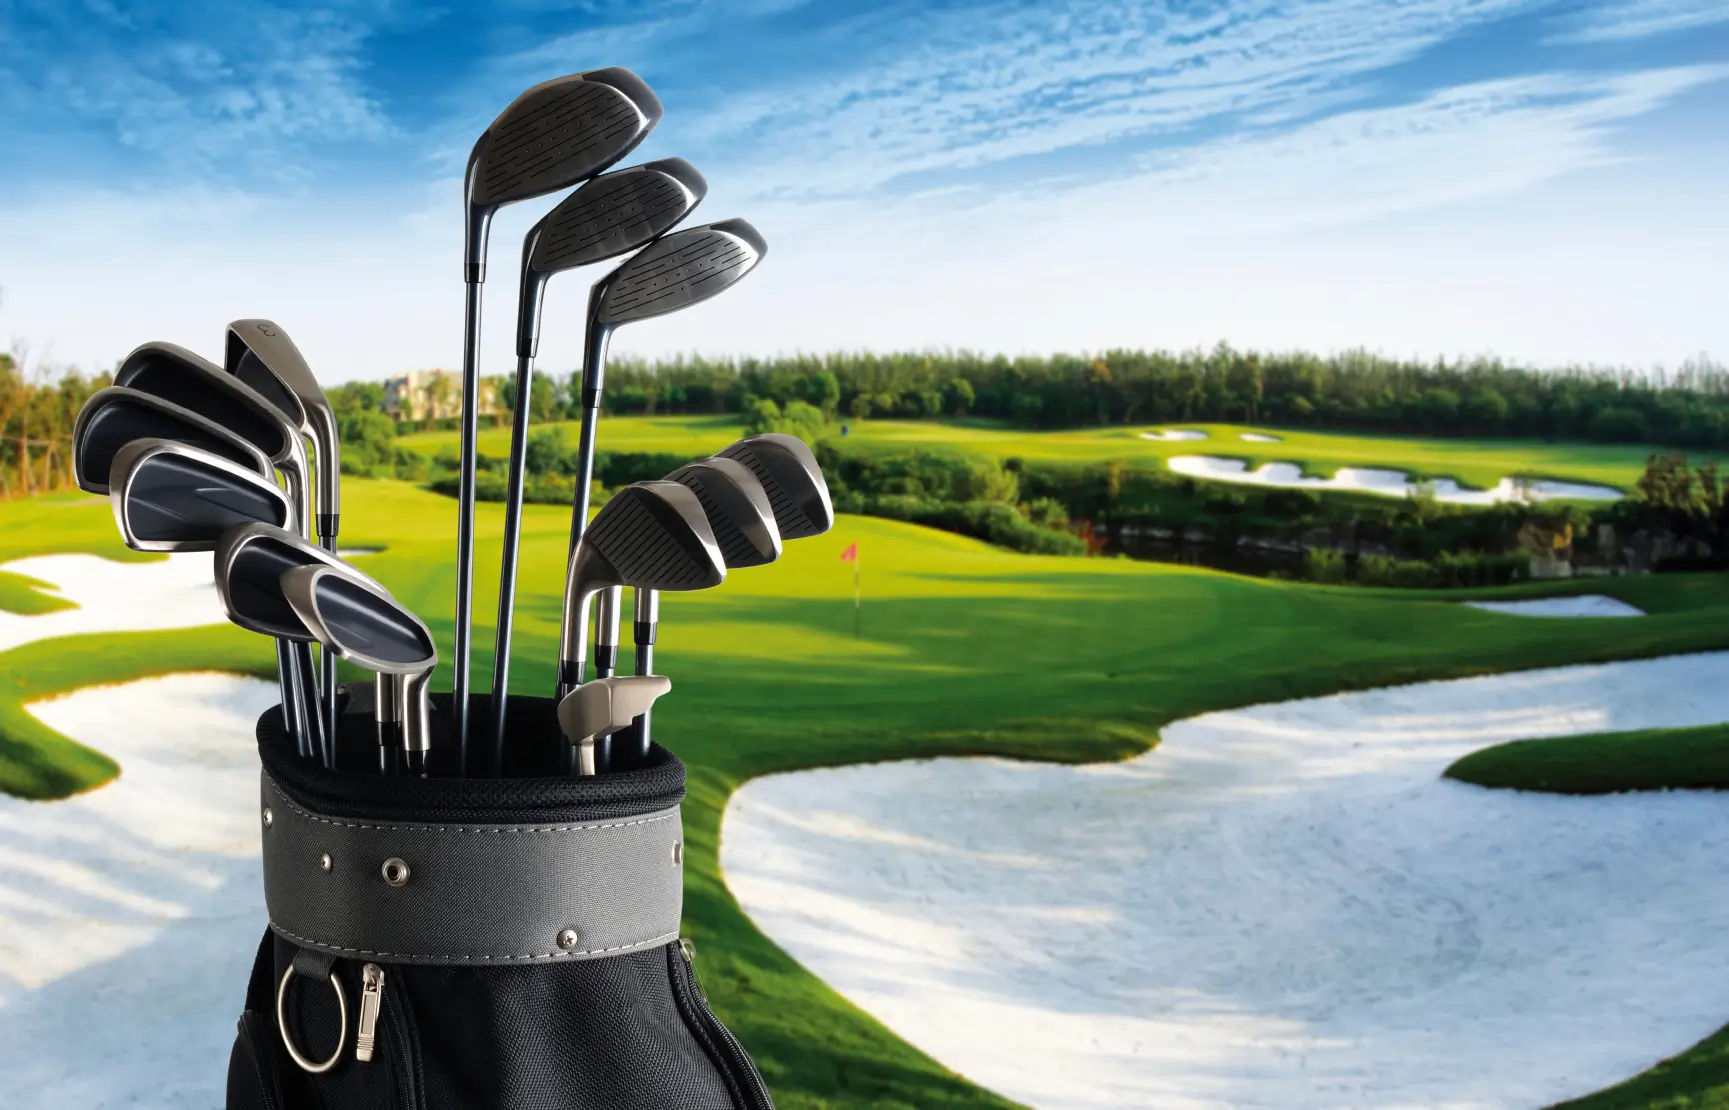 Set of golf clubs with golf course in the background.